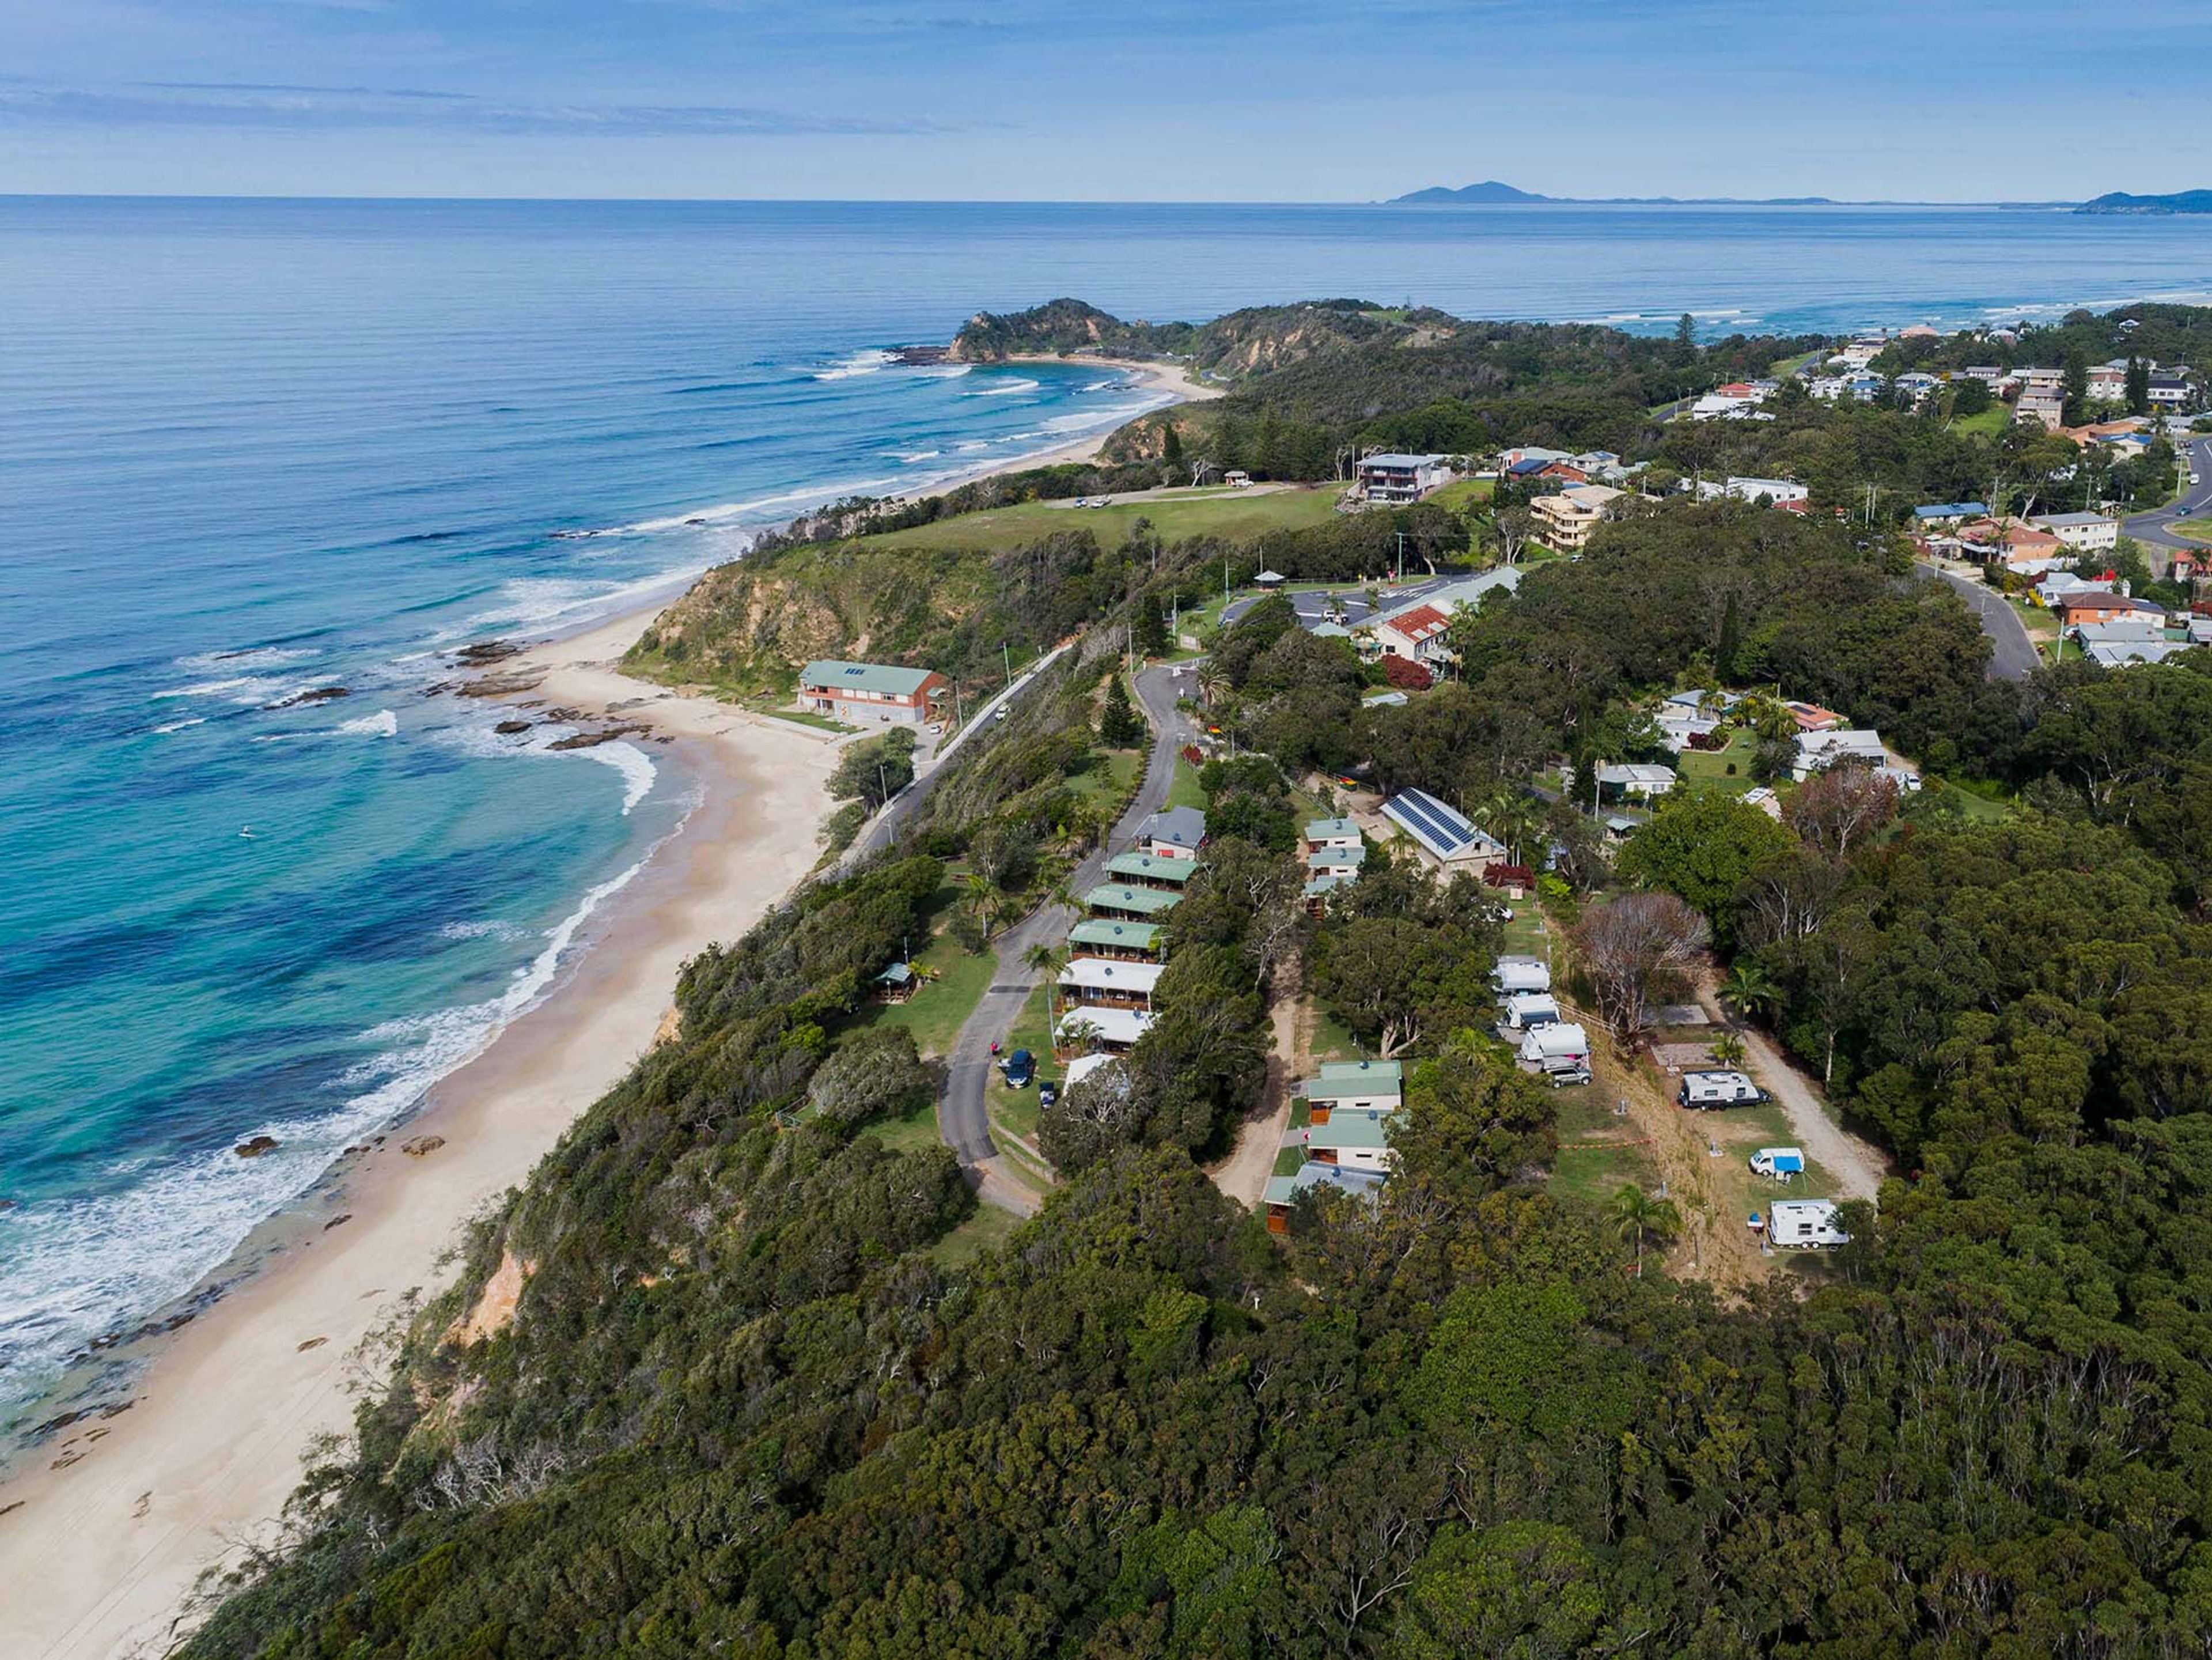 Nambucca Heads aerial view of the park and coastline